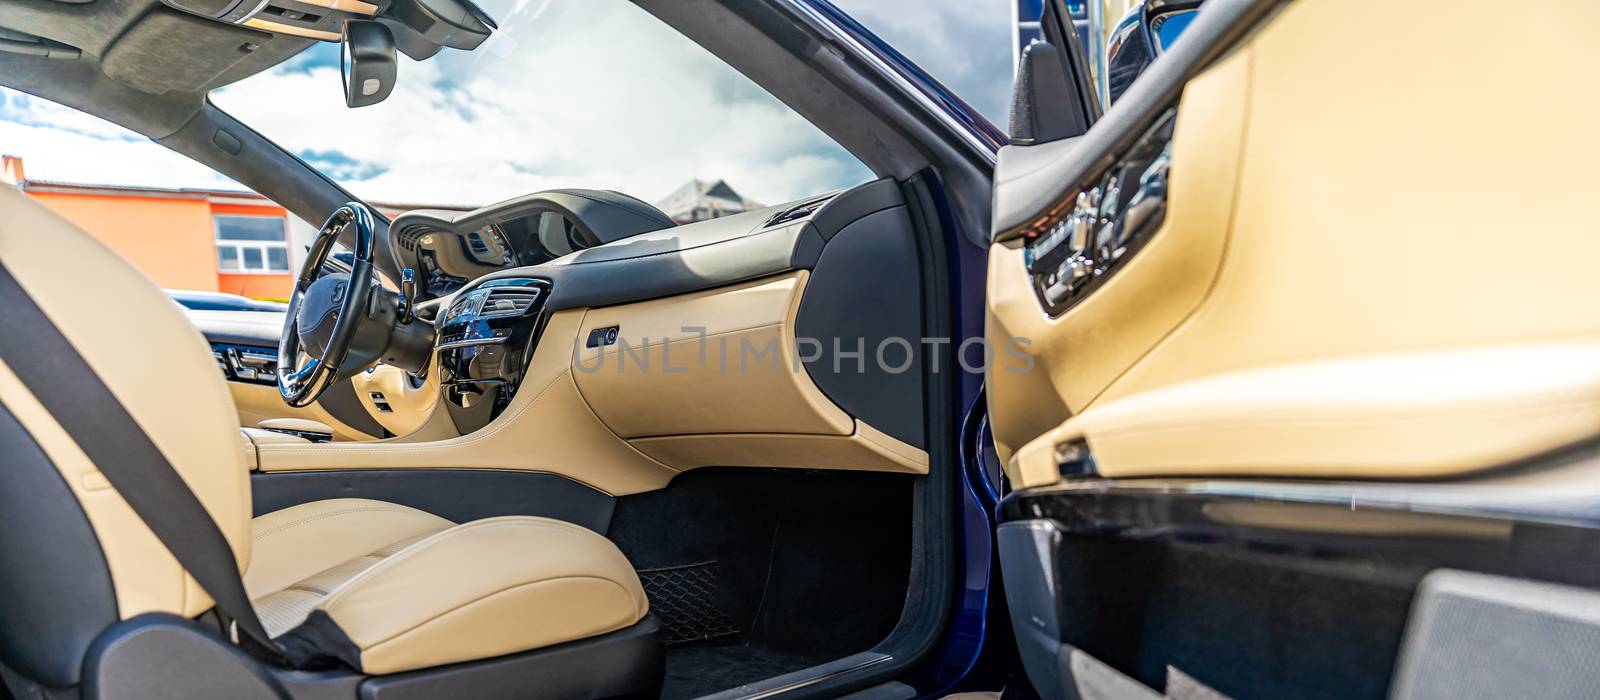 interior of a luxury car, noble materials and quality workmanship by Edophoto